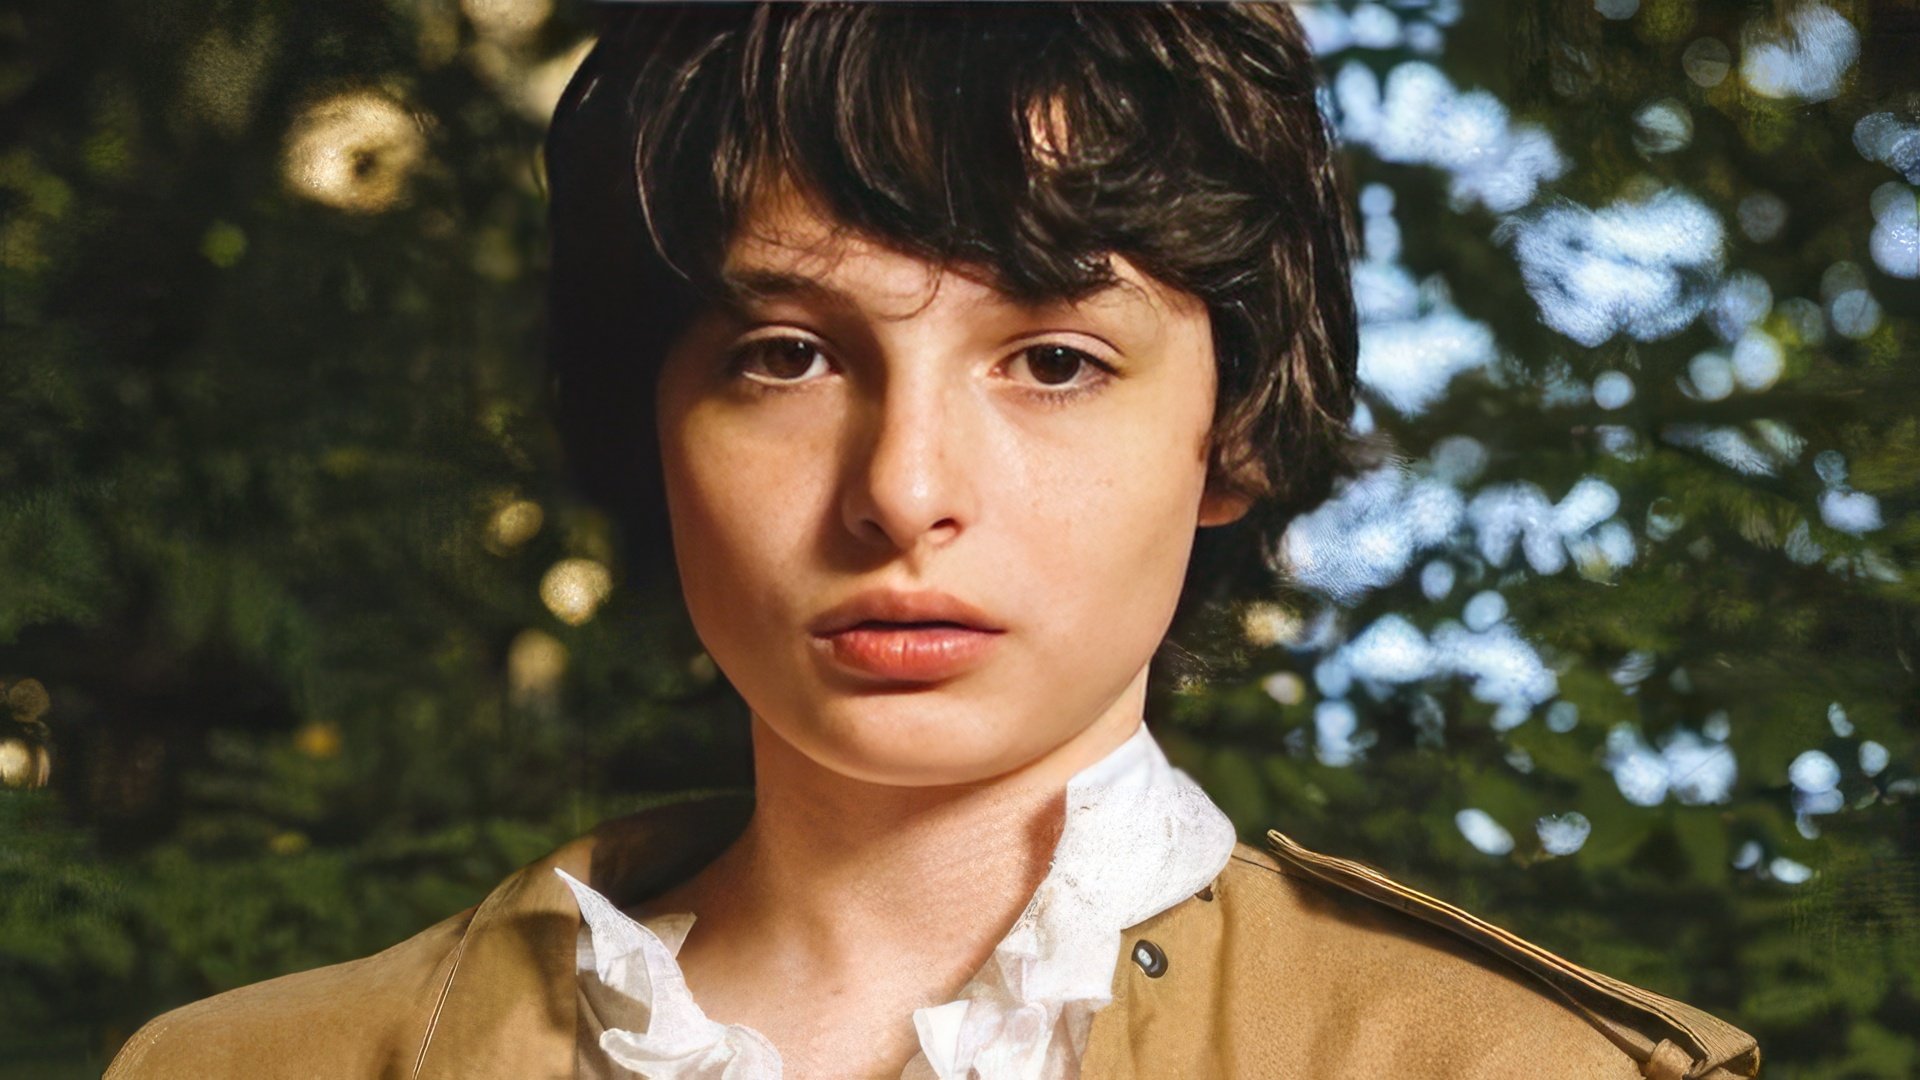 A star of «It» and the series «Stranger Things» Finn Wolfhard